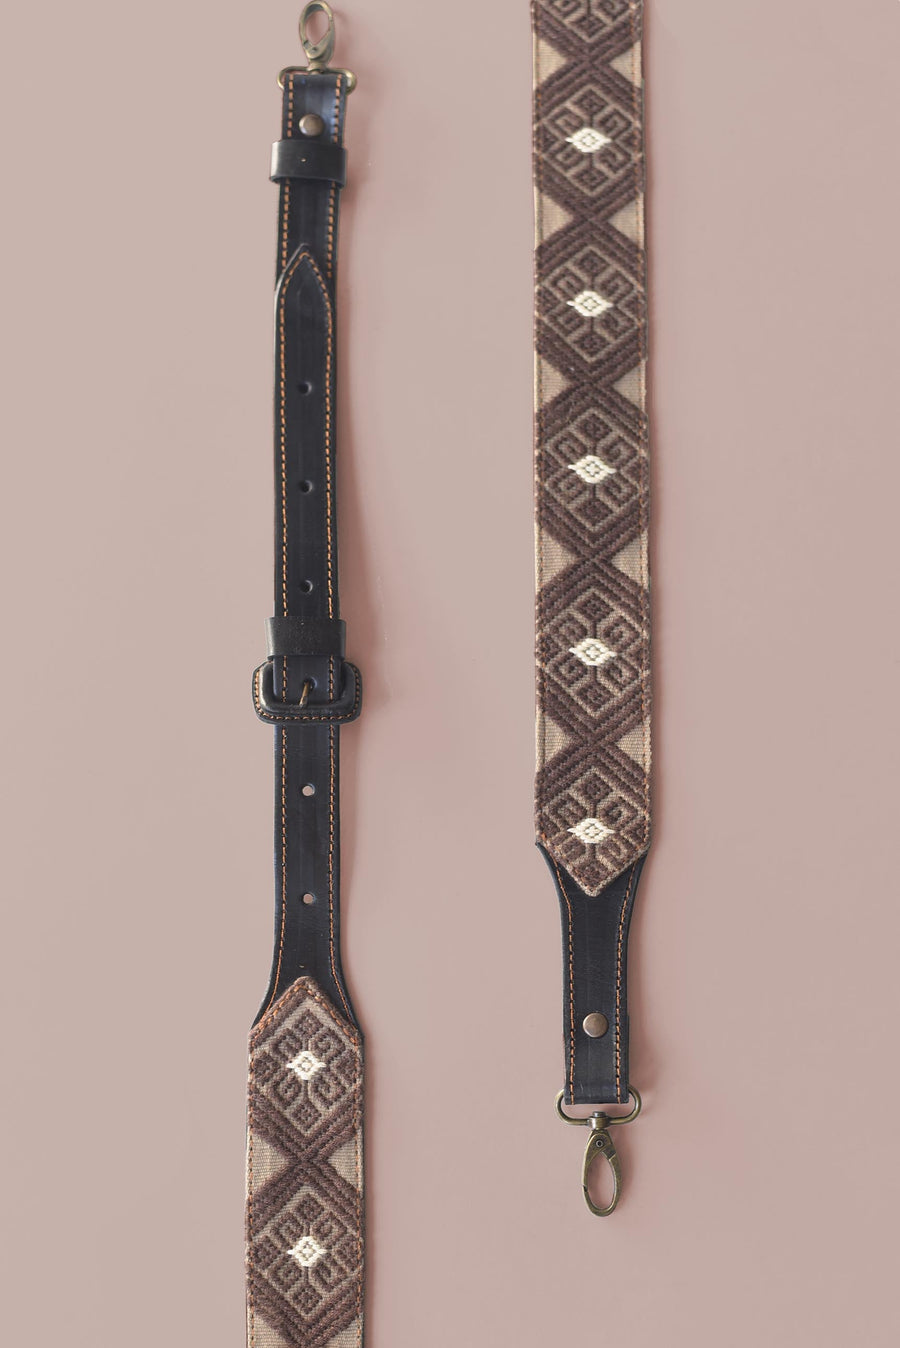 Textile + Leather Bag Strap - wearwell